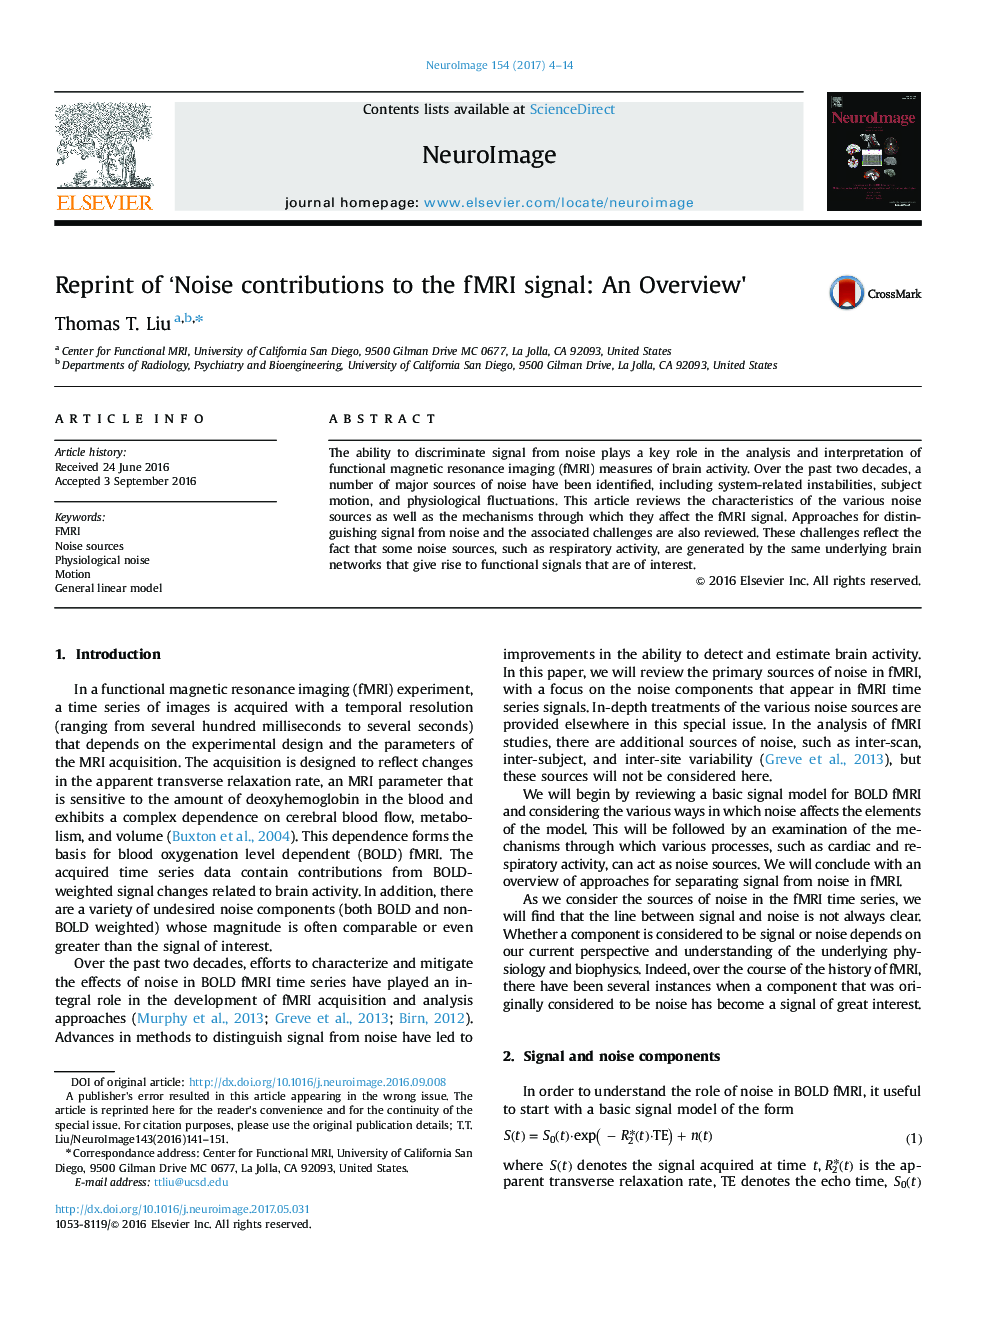 Reprint of 'Noise contributions to the fMRI signal: An Overview'